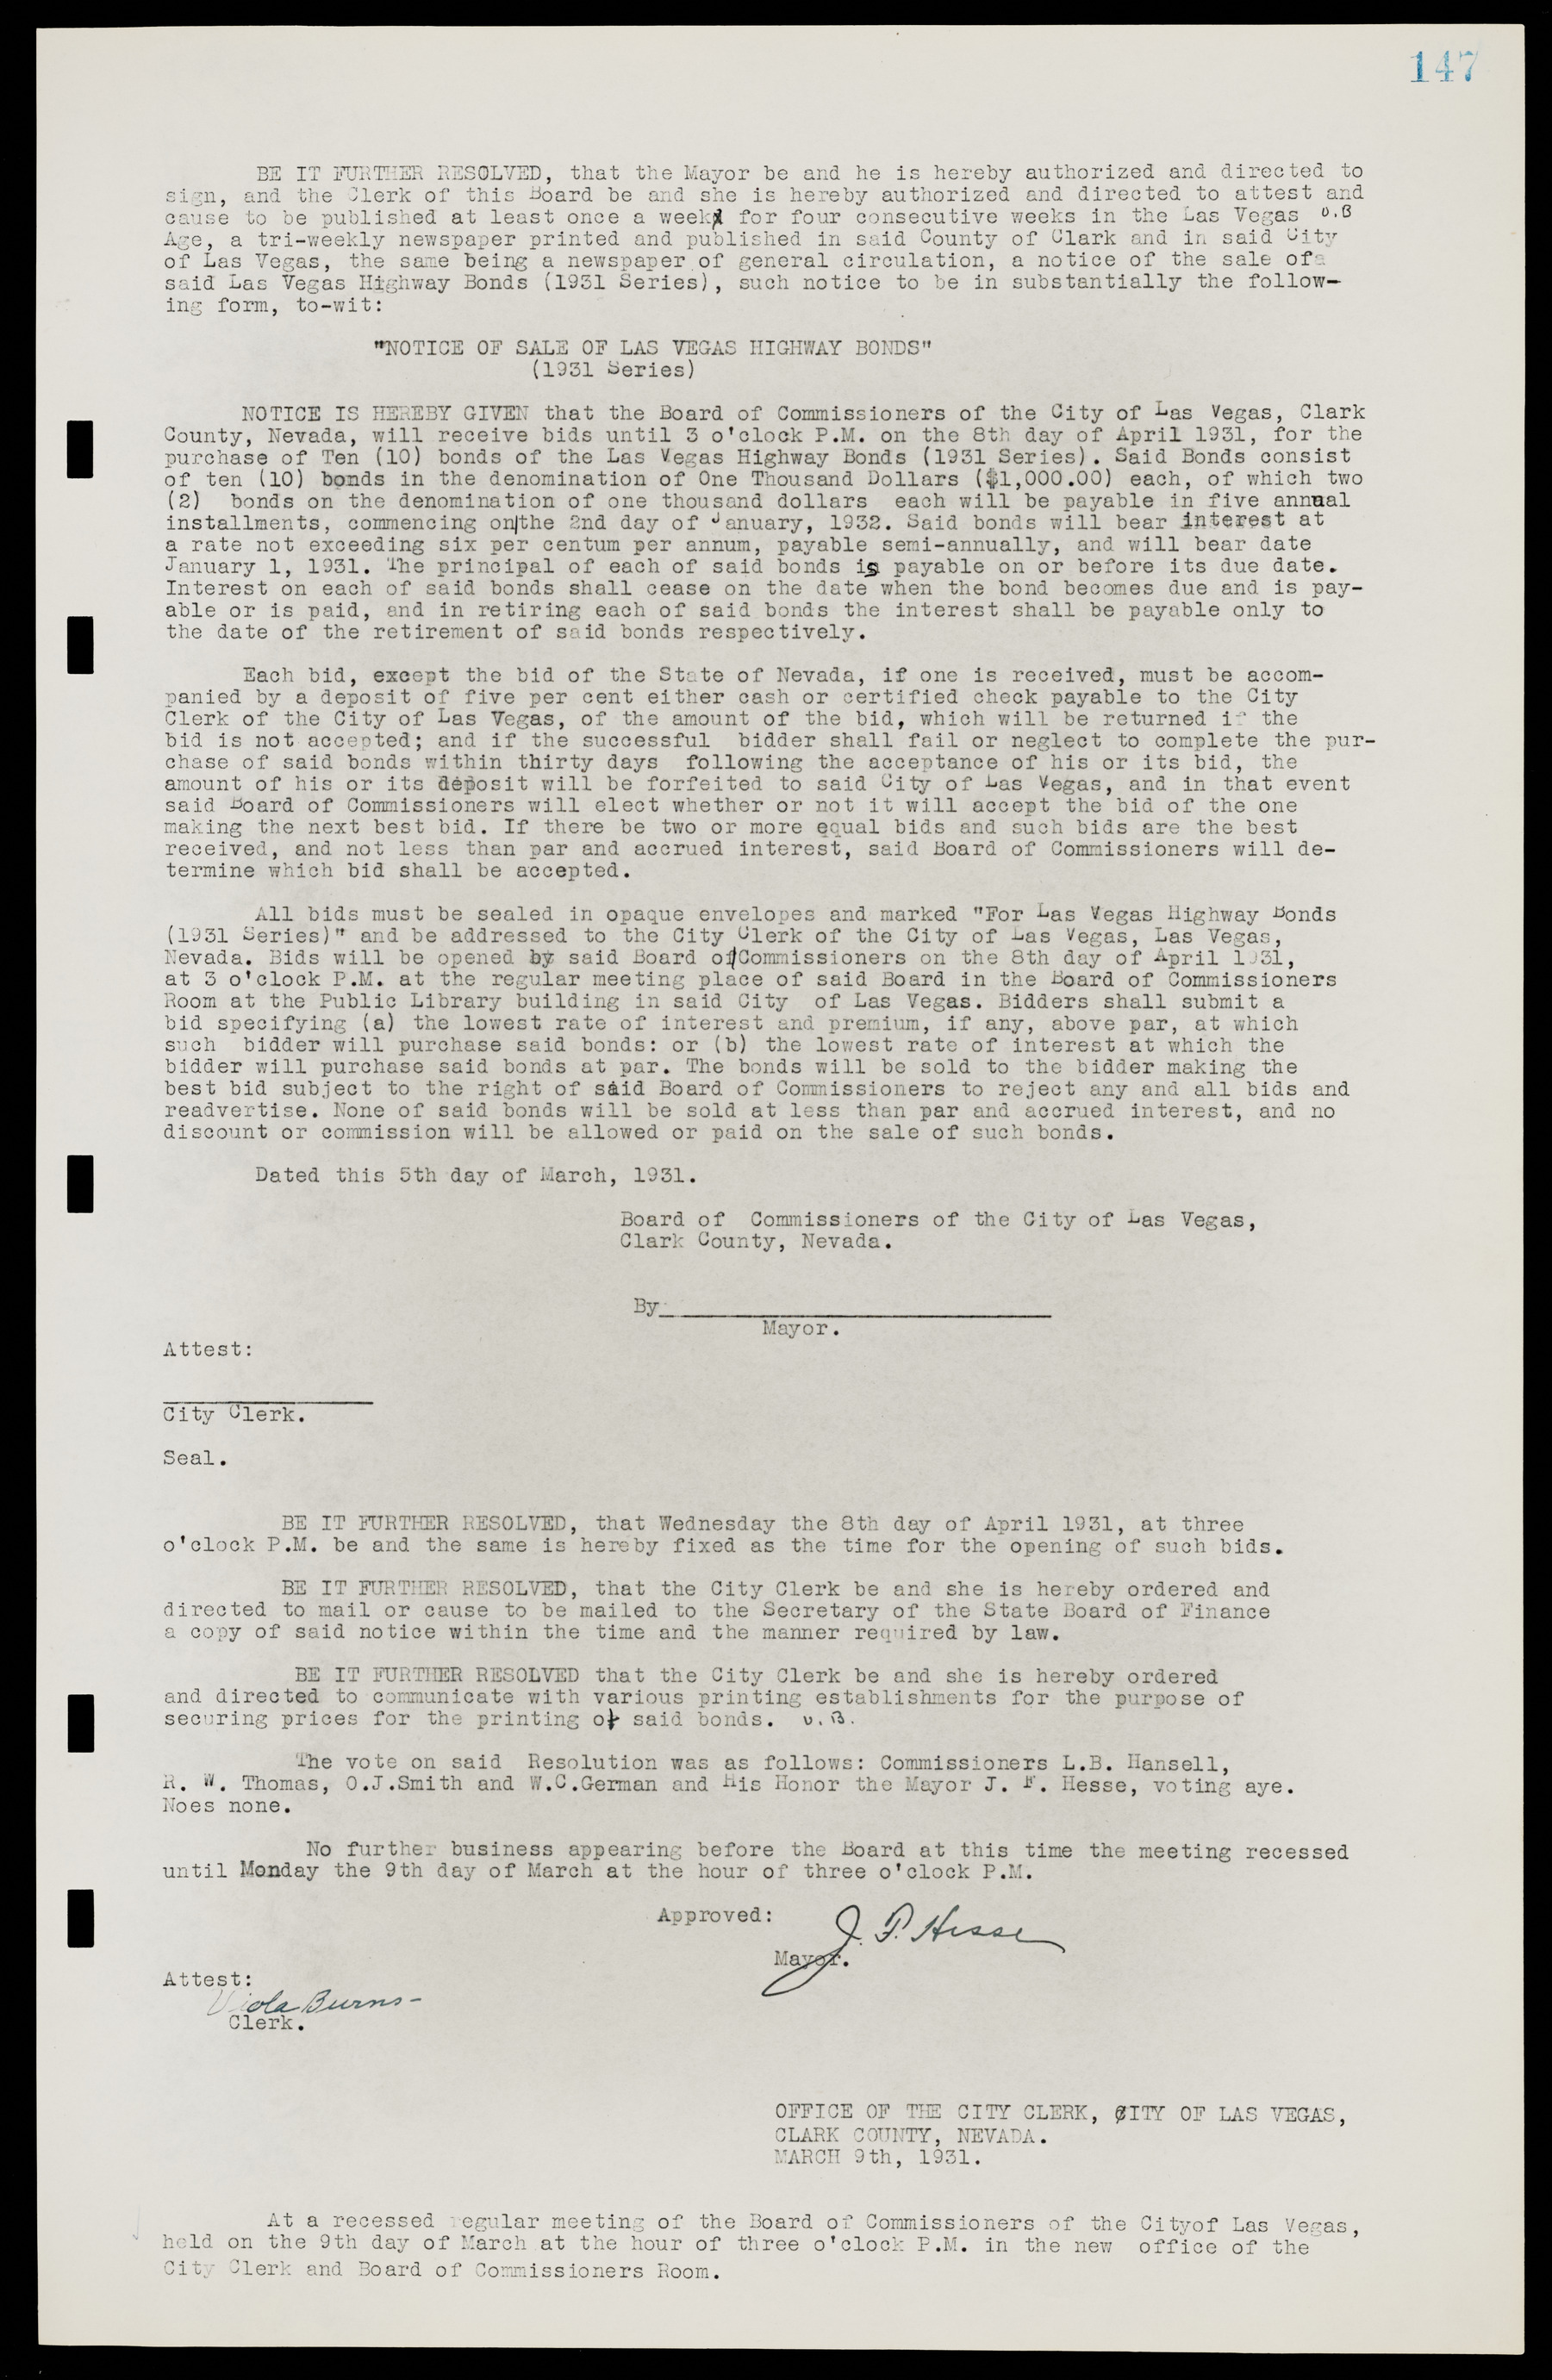 Las Vegas City Commission Minutes, May 14, 1929 to February 11, 1937, lvc000003-153